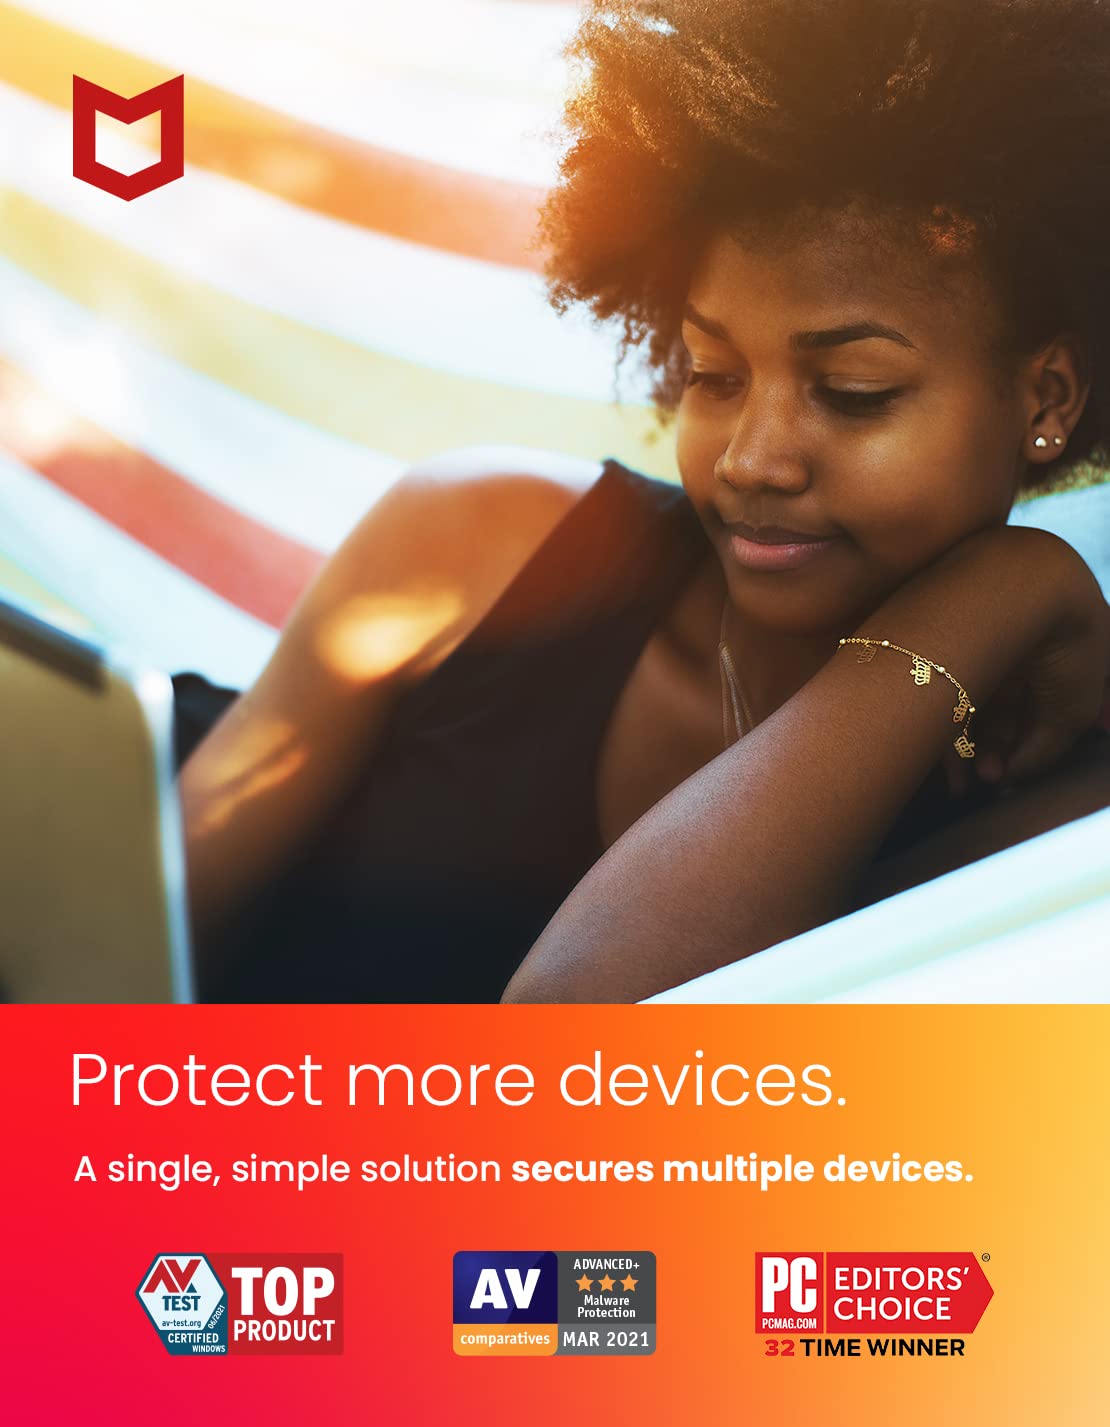 McAfee Total Protection | 3 Device | Antivirus Internet Security Software | VPN, Password Manager, Dark Web Monitoring | 1 Year Subscription | Download Code